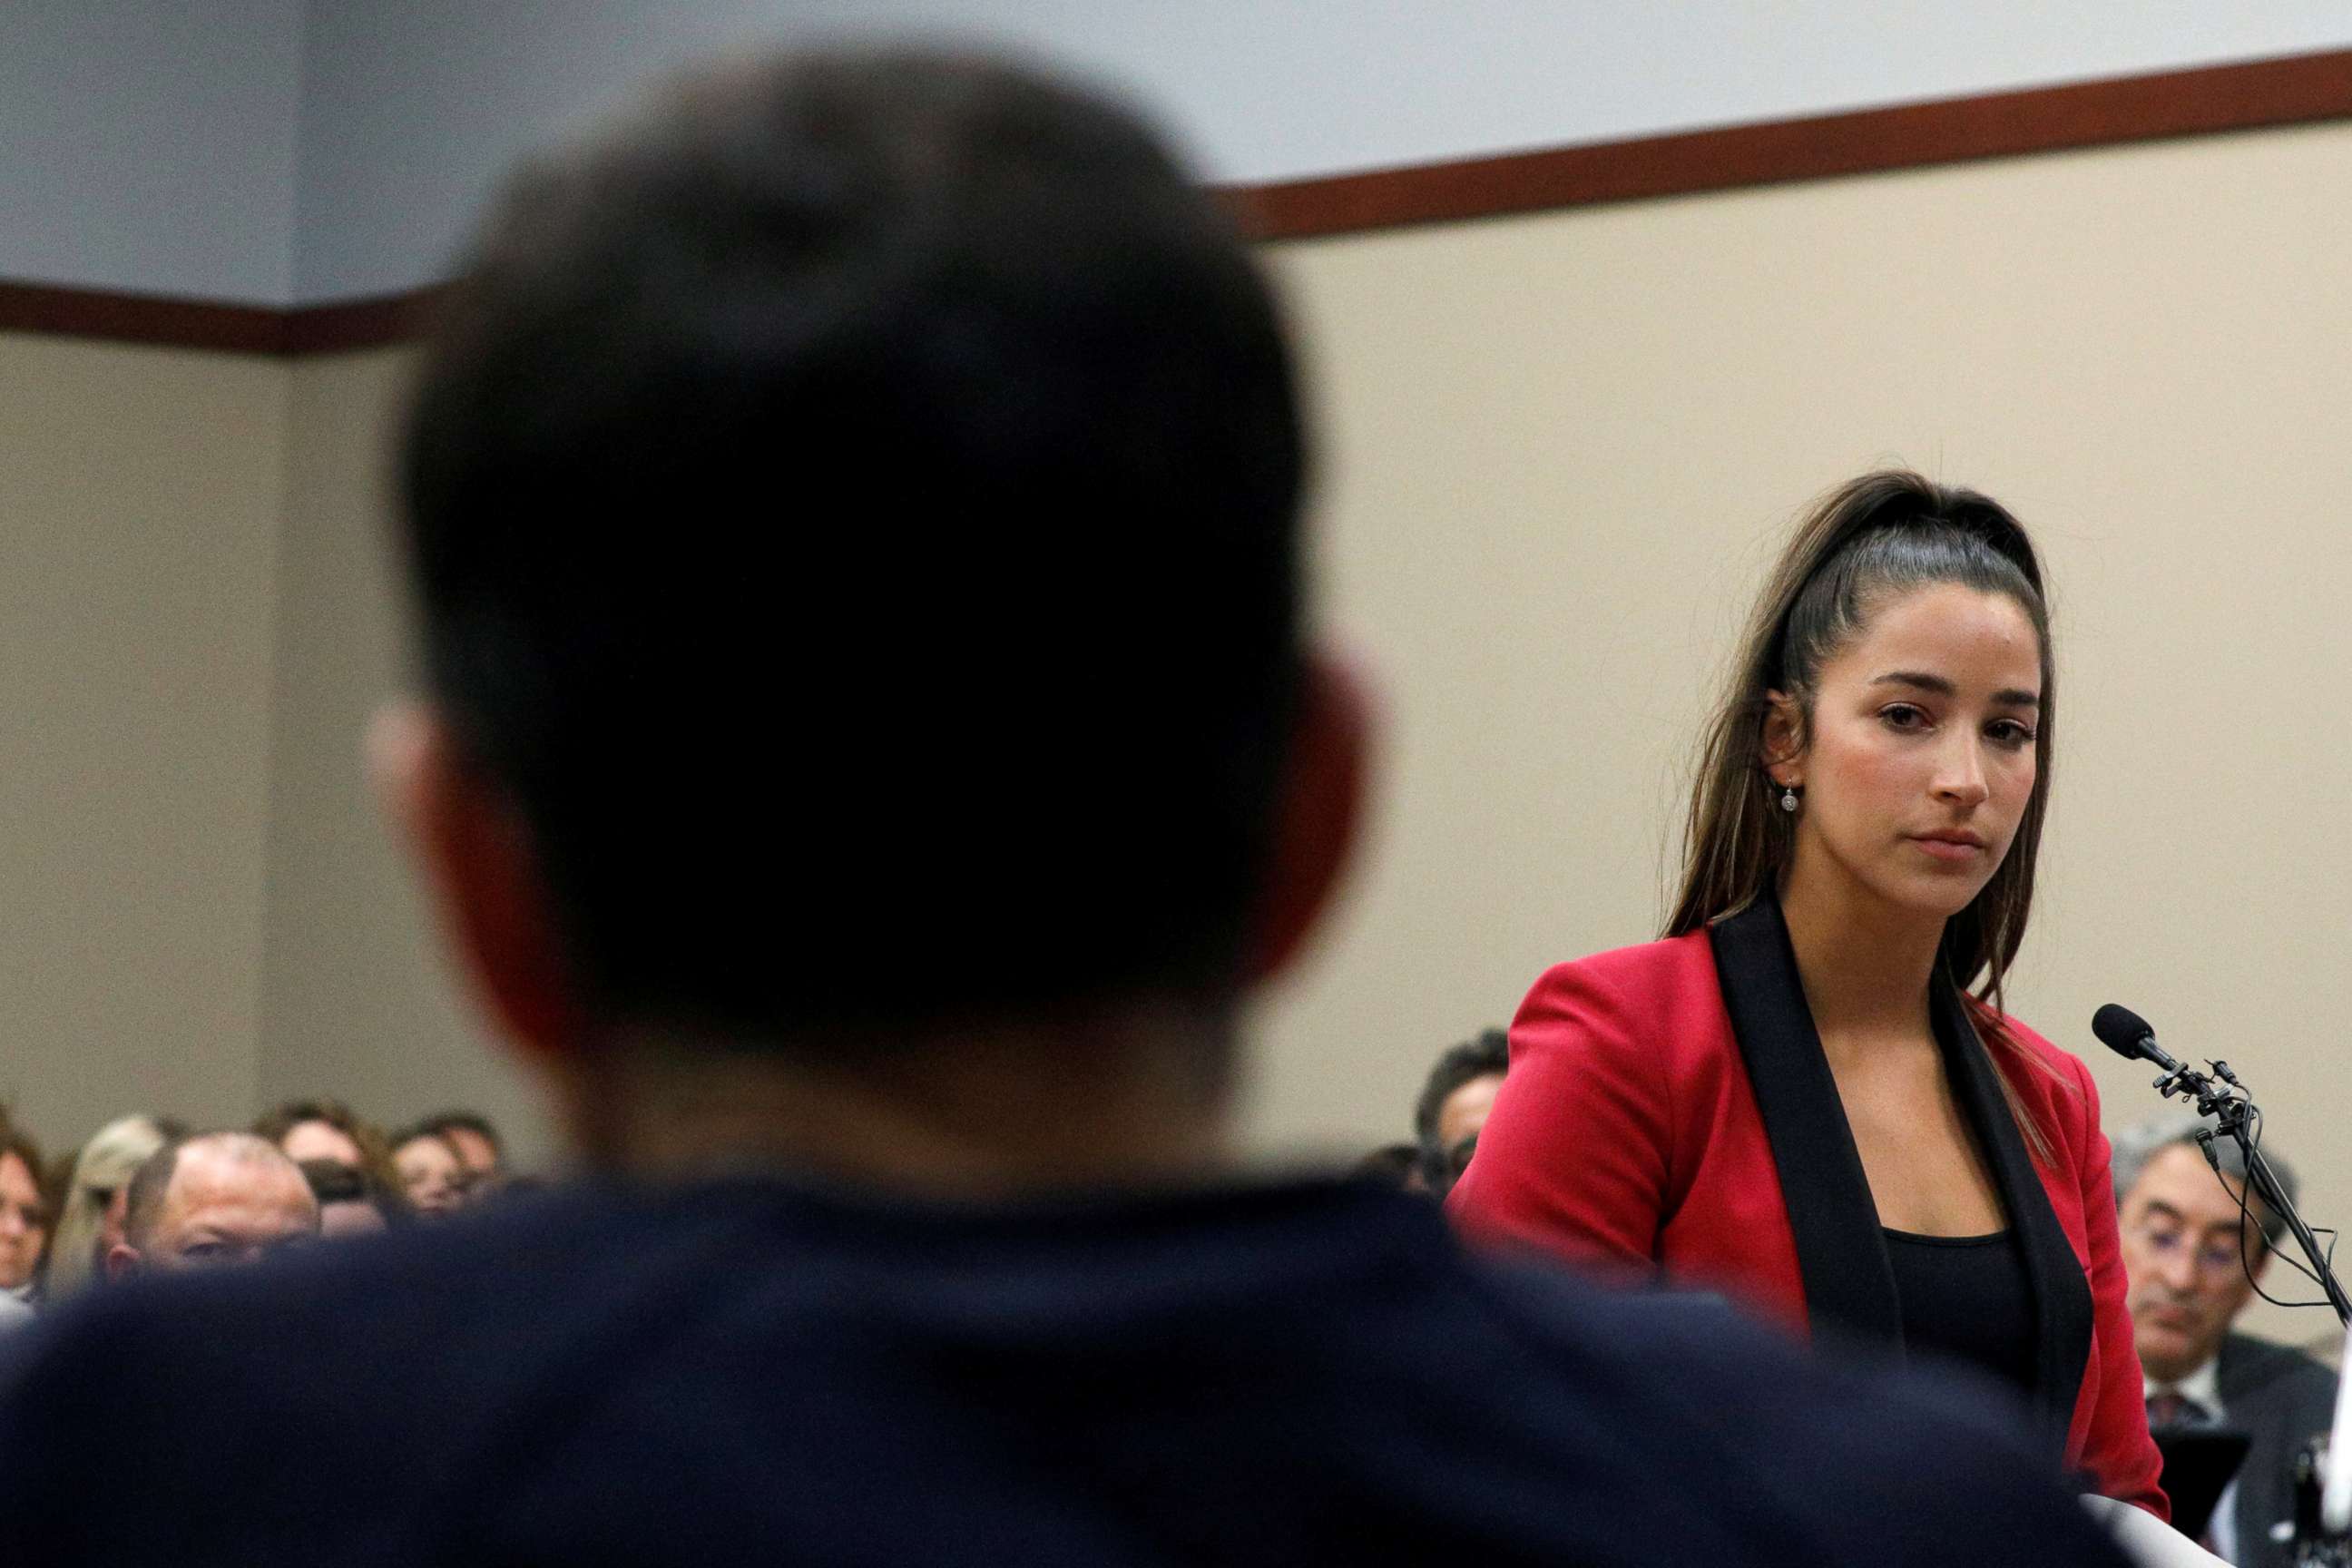 PHOTO: Victim and former gymnast Aly Raisman speaks at the sentencing hearing for Larry Nassar, a former team USA Gymnastics doctor who pleaded guilty in November 2017 to sexual assault charges, in Lansing, Mich., Jan. 19, 2018. 